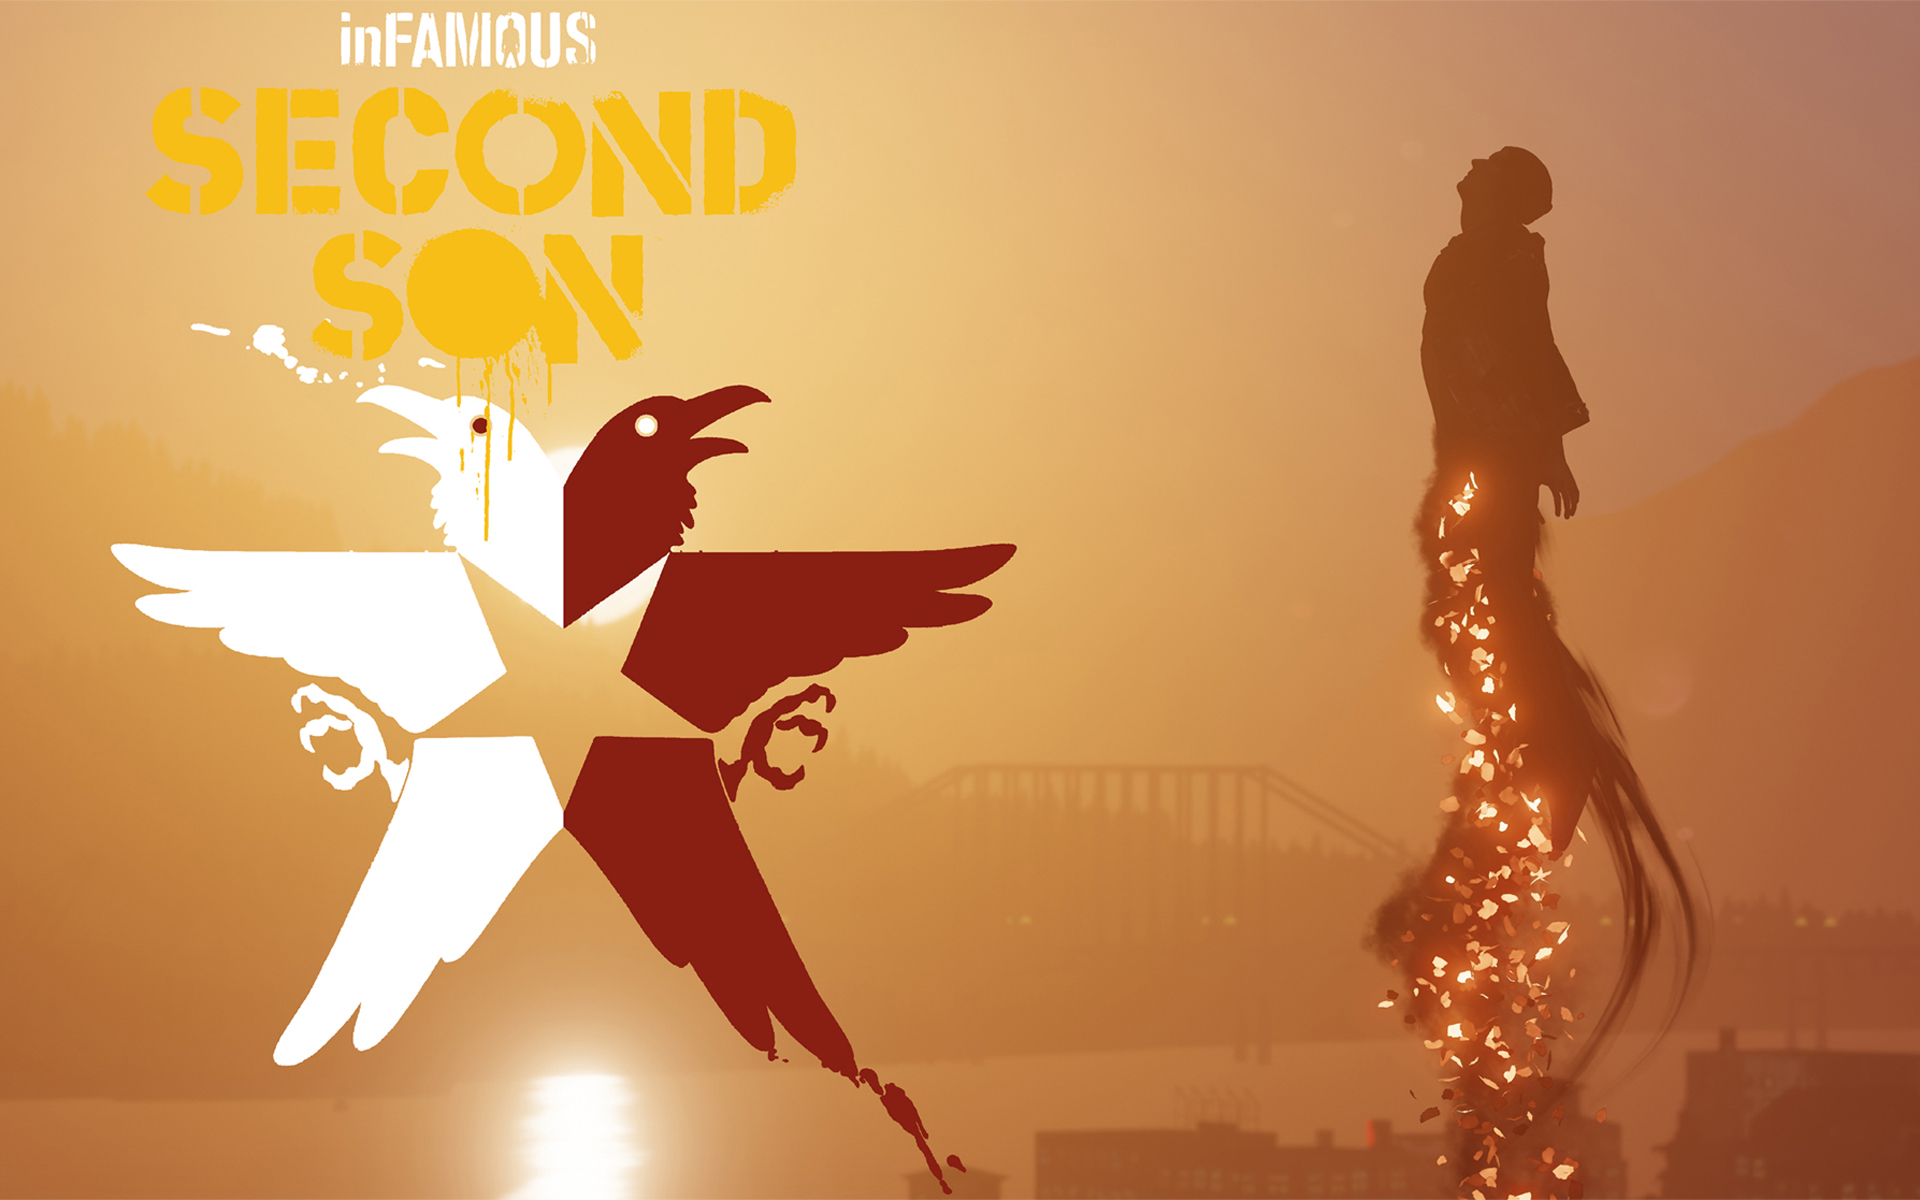 Infamous Second Son HD Wallpaper